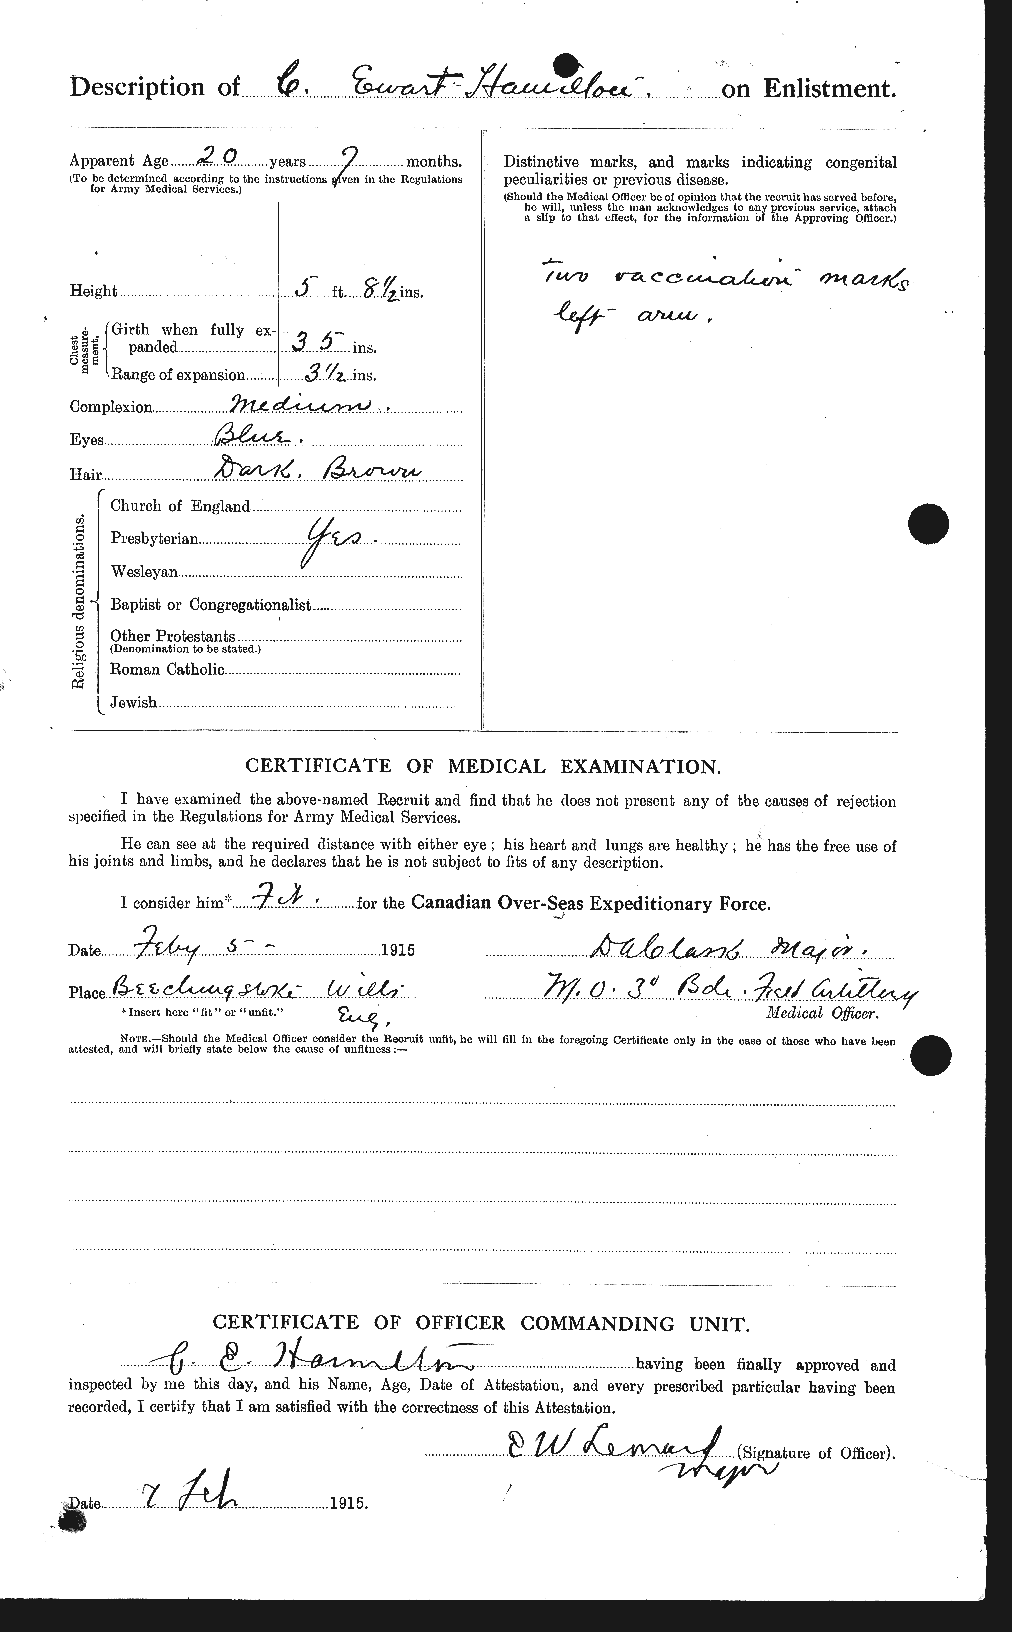 Personnel Records of the First World War - CEF 375280b